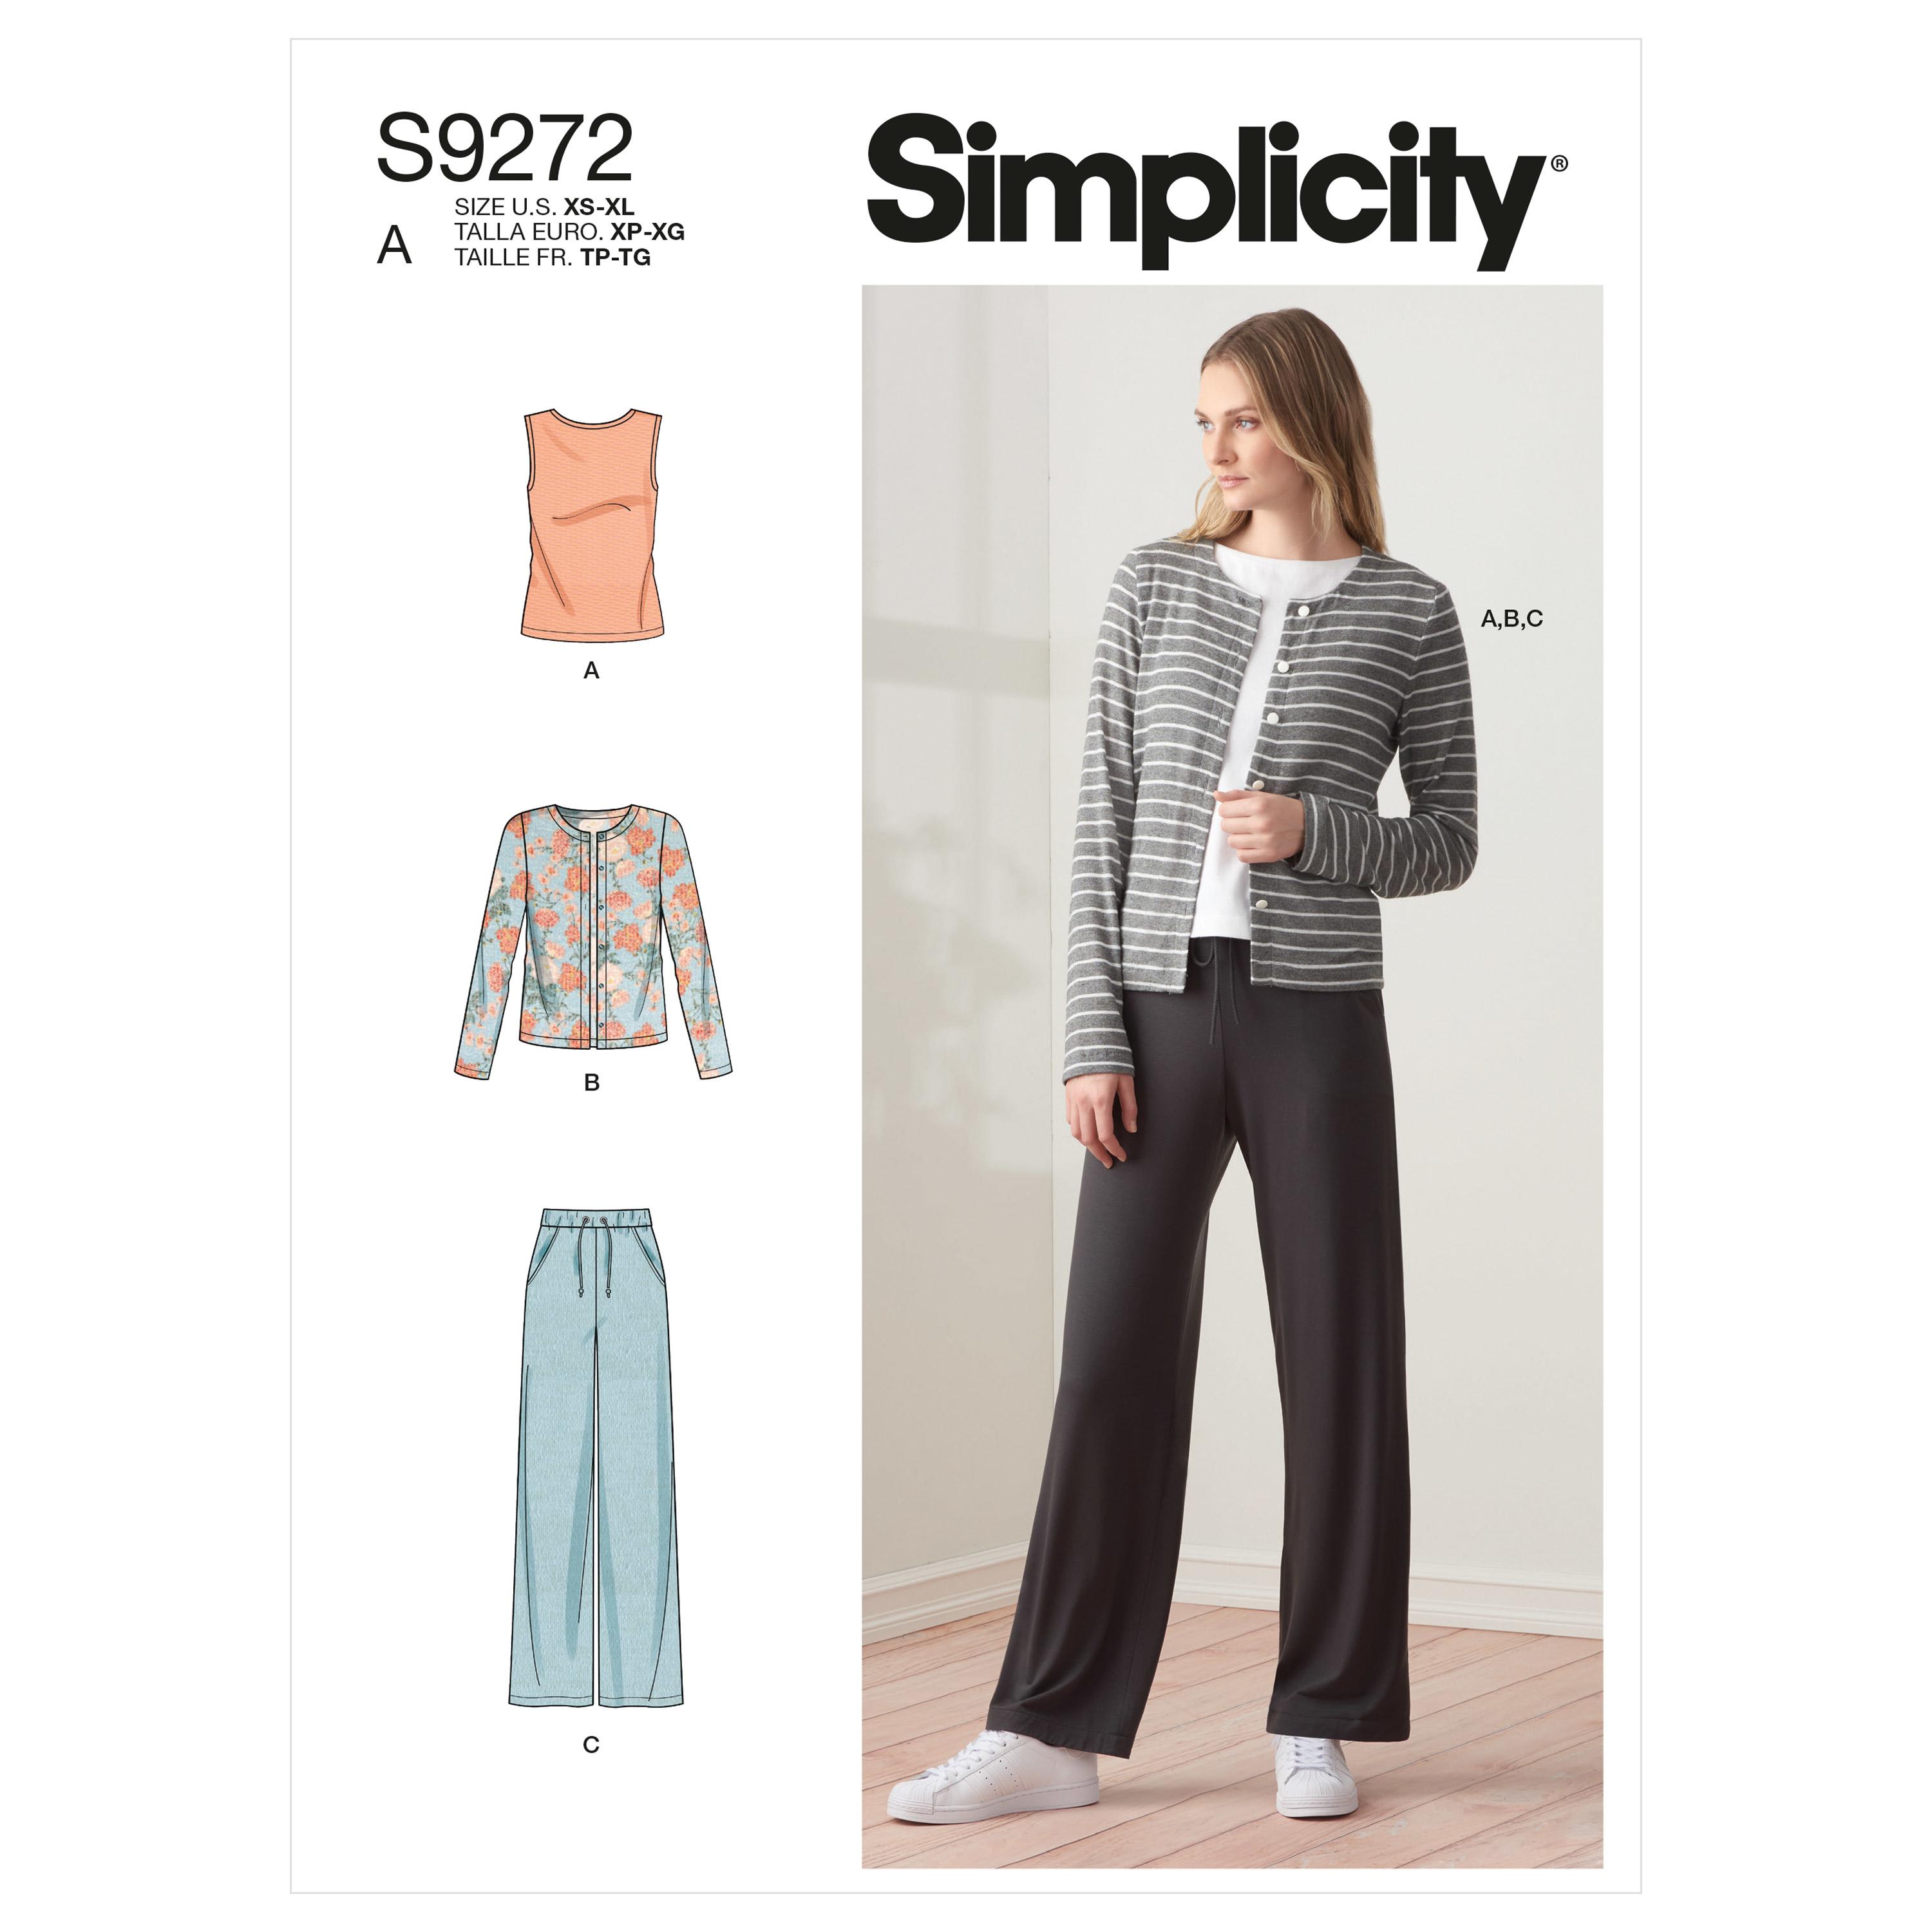 Simplicity Sewing Pattern S9272 Misses' Knit Cardigan Top & Pants